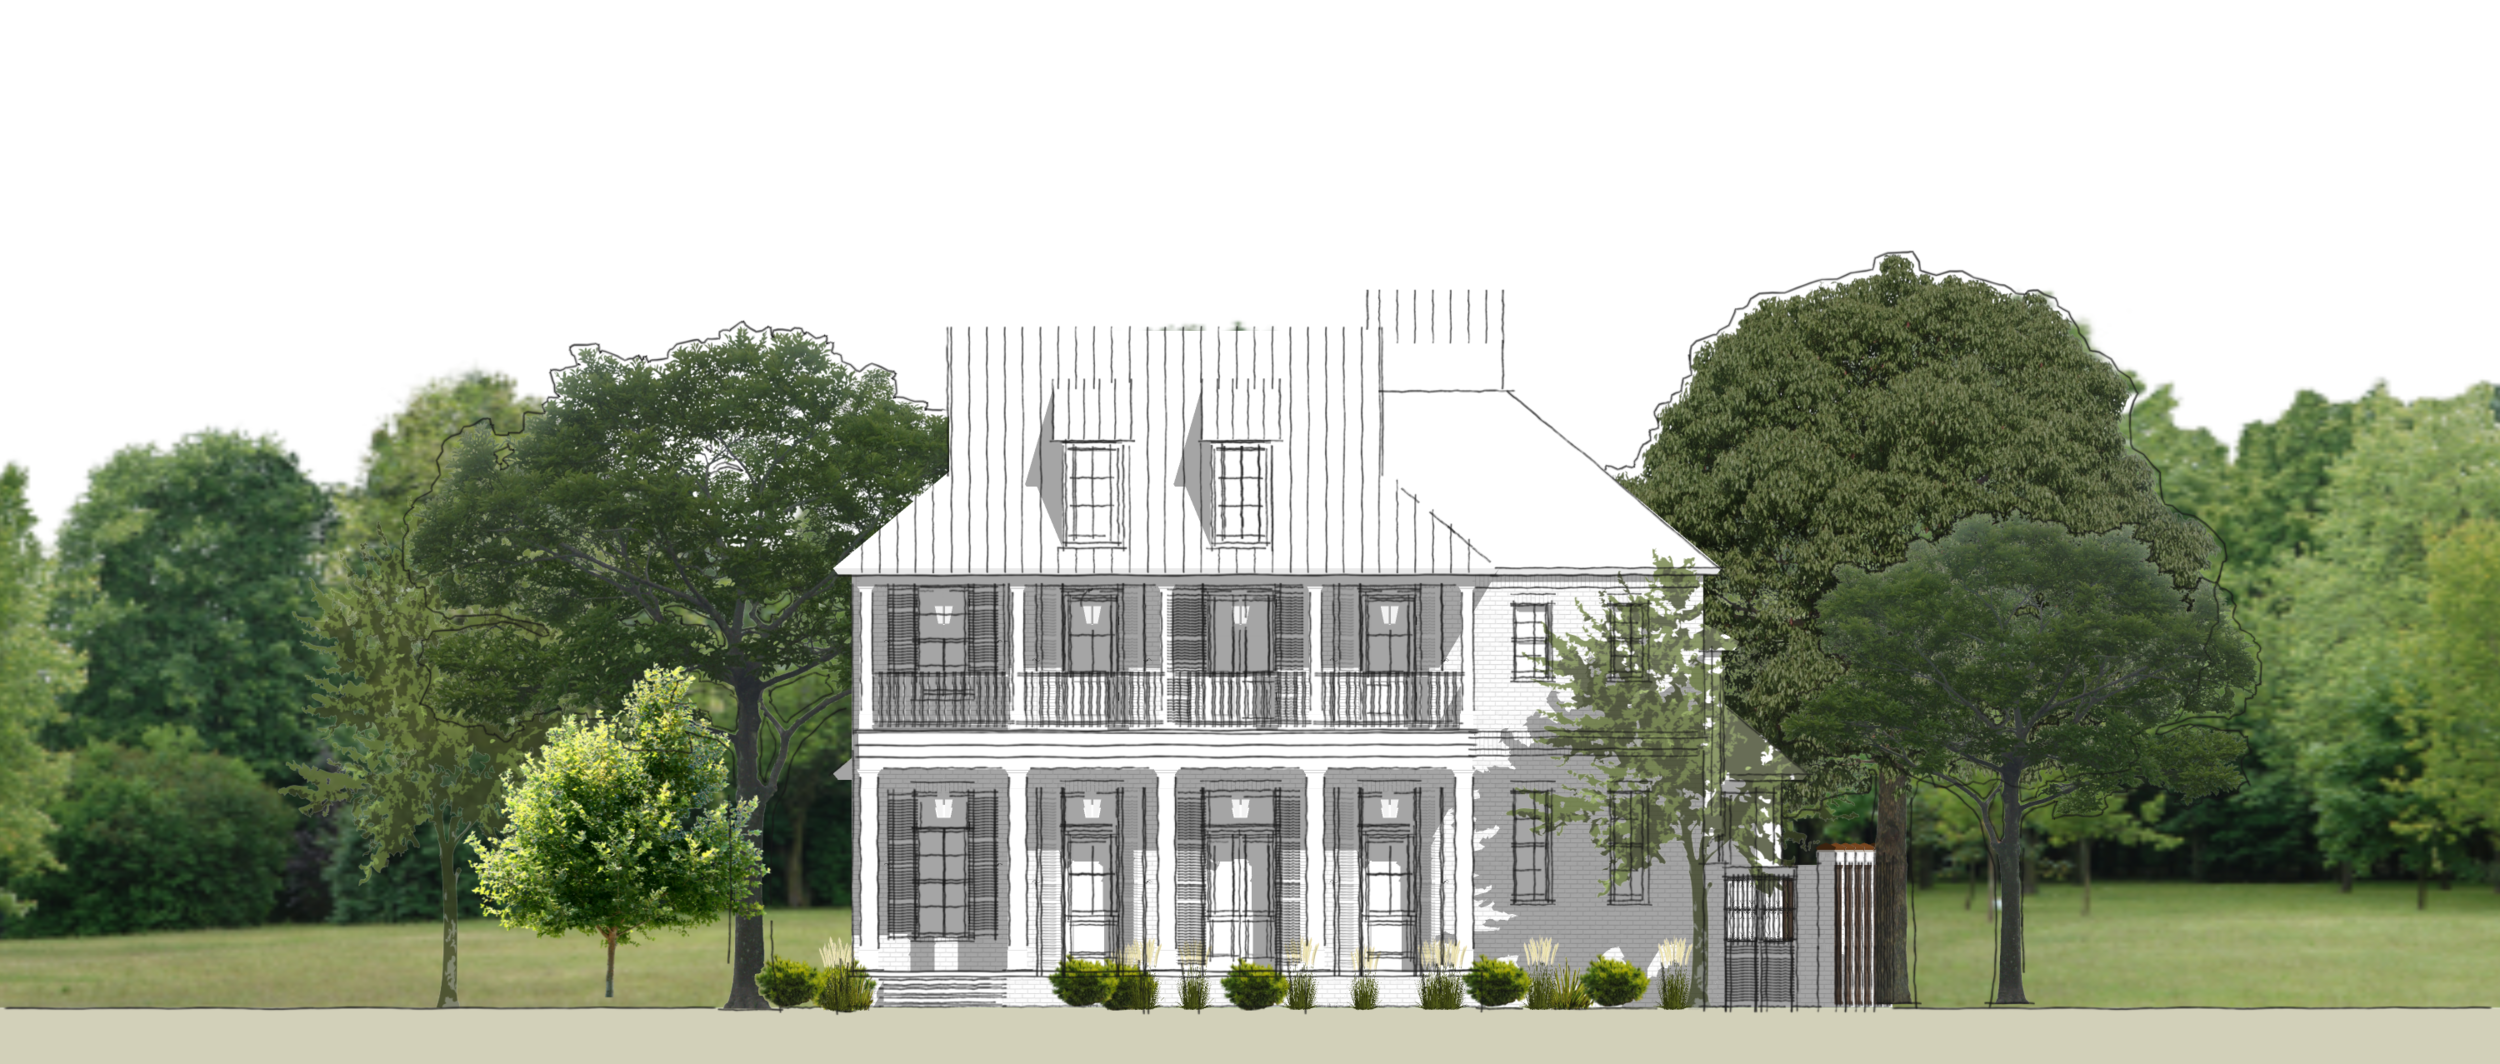 Overton_Front Elevation - Jacob.png